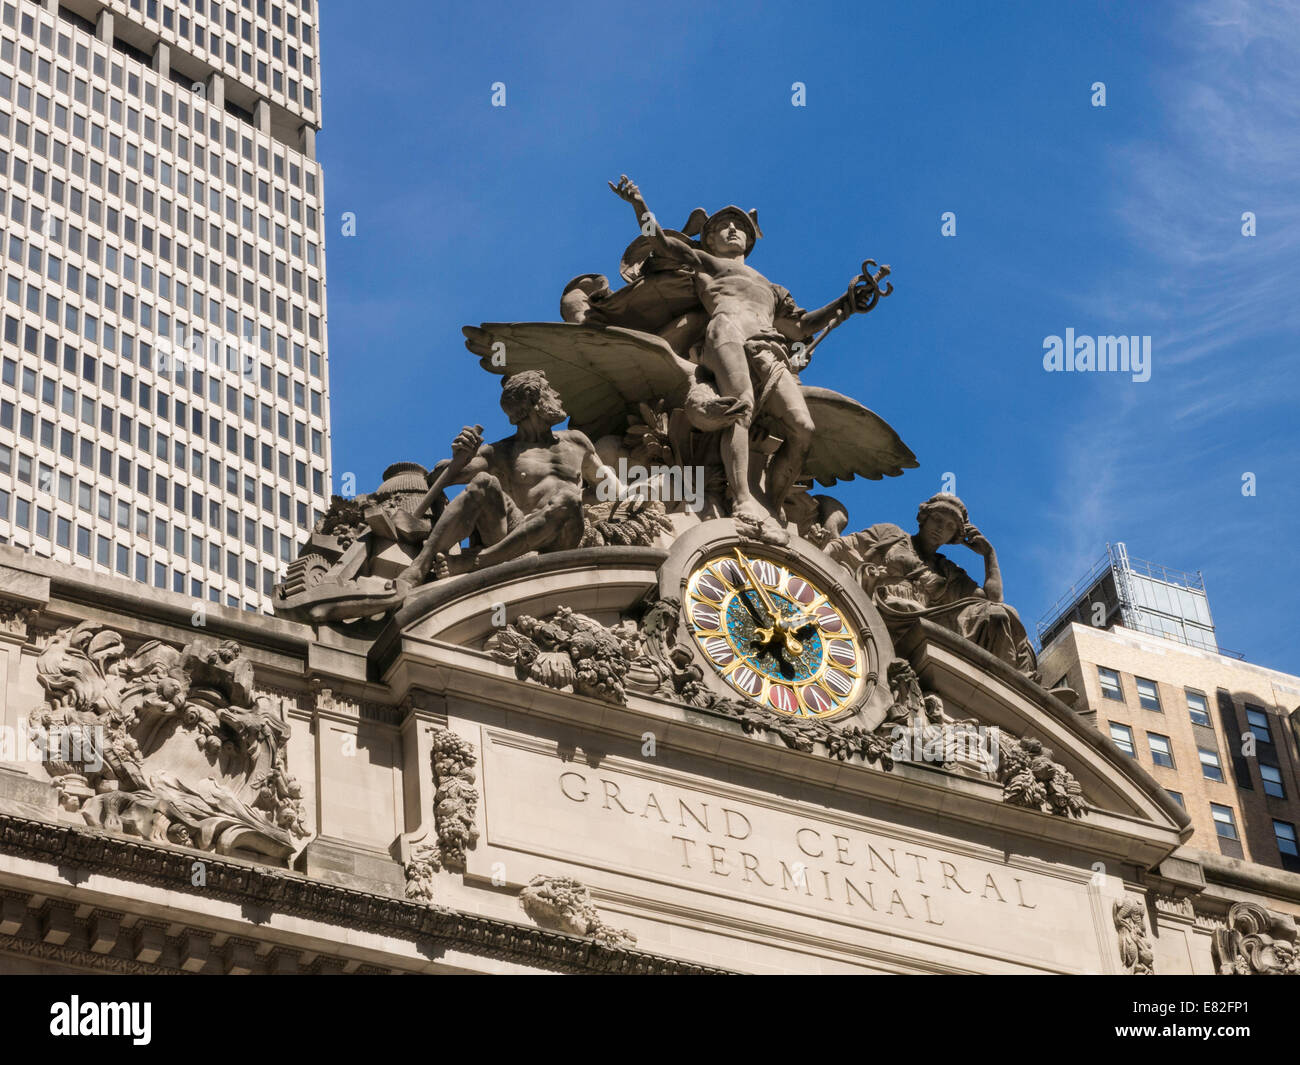 The facade of Grand Central Terminal features a transportation sculpture and a Tiffany glass clock, New York City, USA Stock Photo